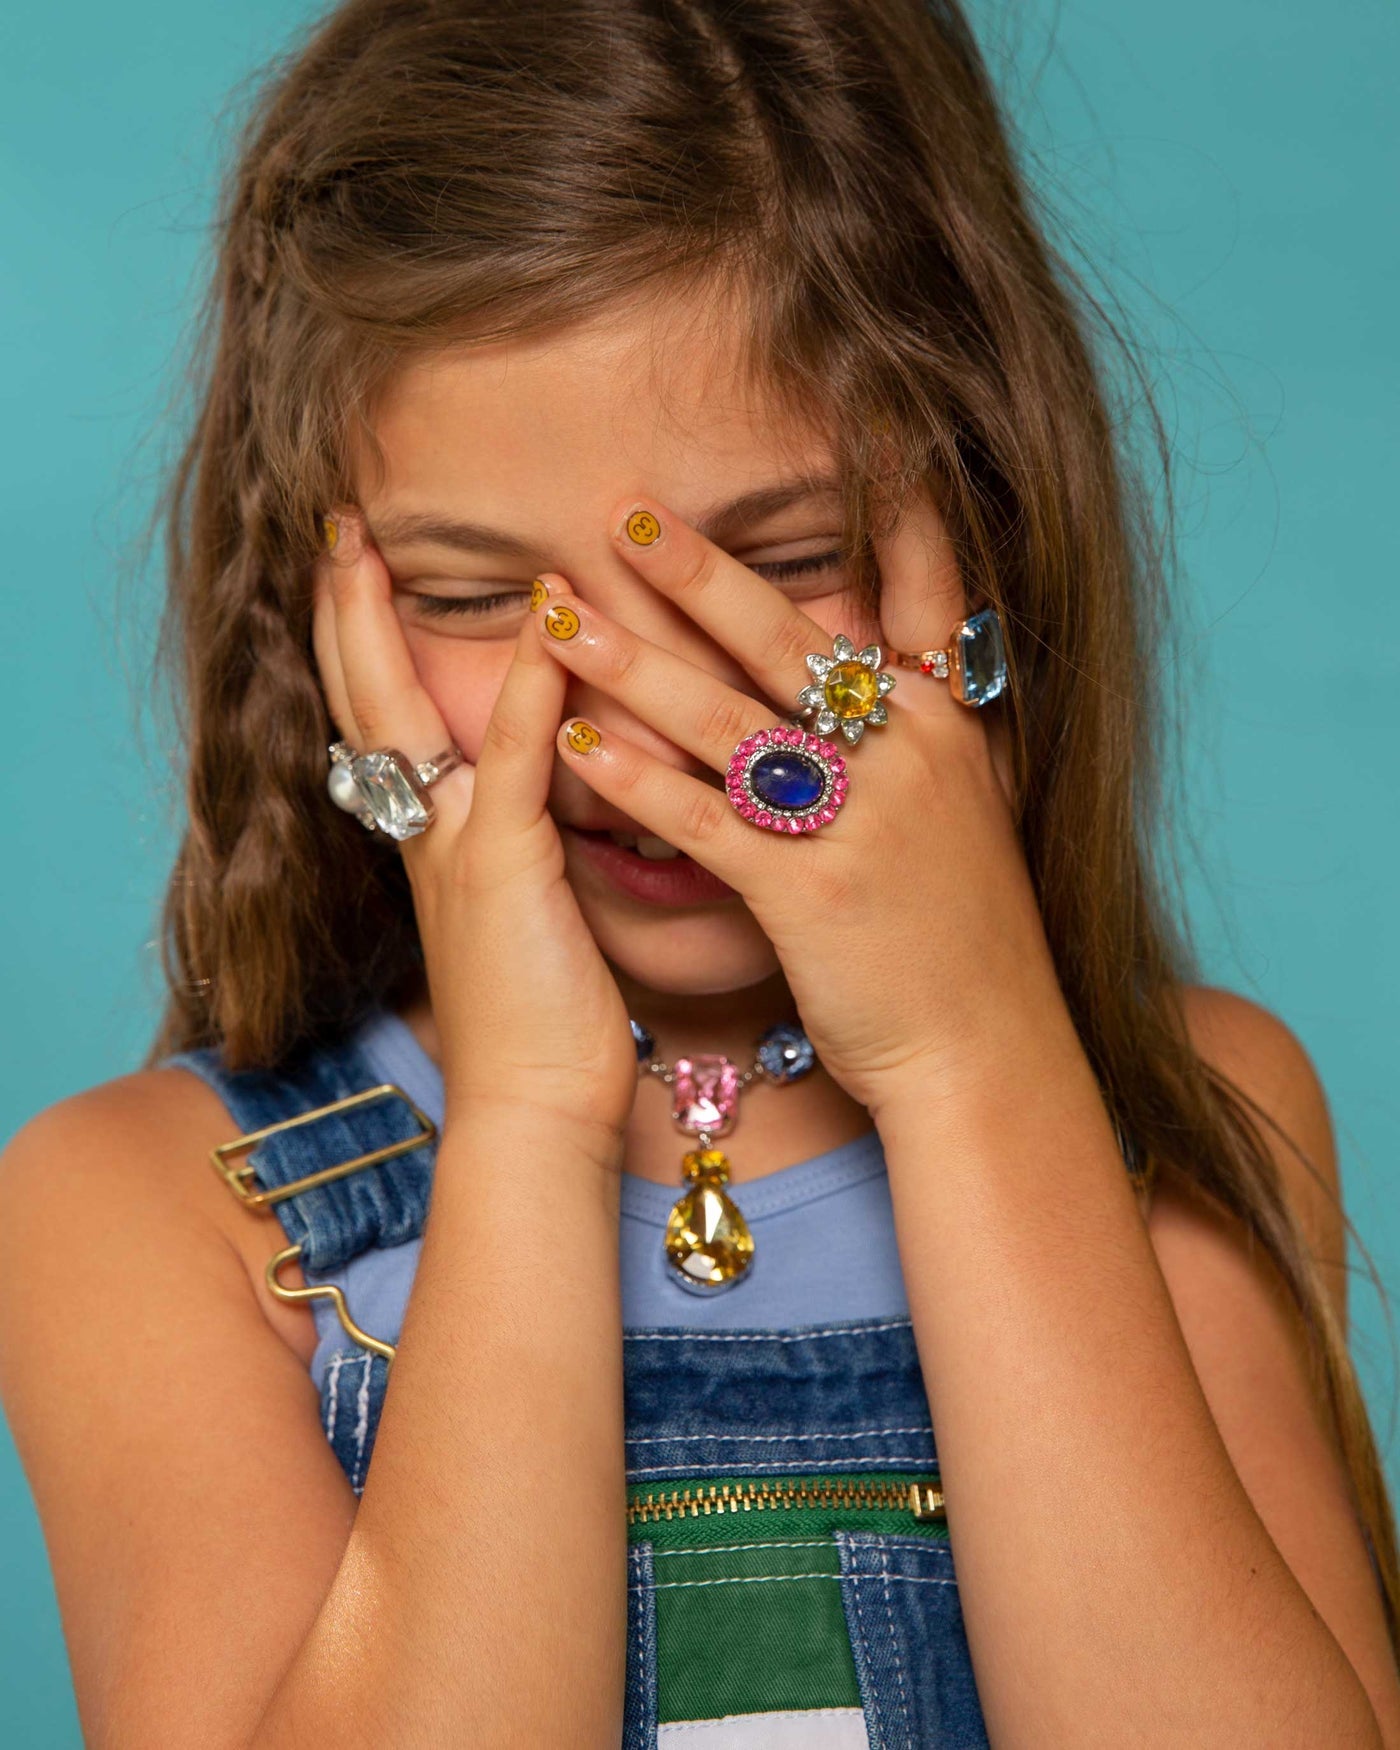 Super Smalls Me Time Double Kids Mood Rings